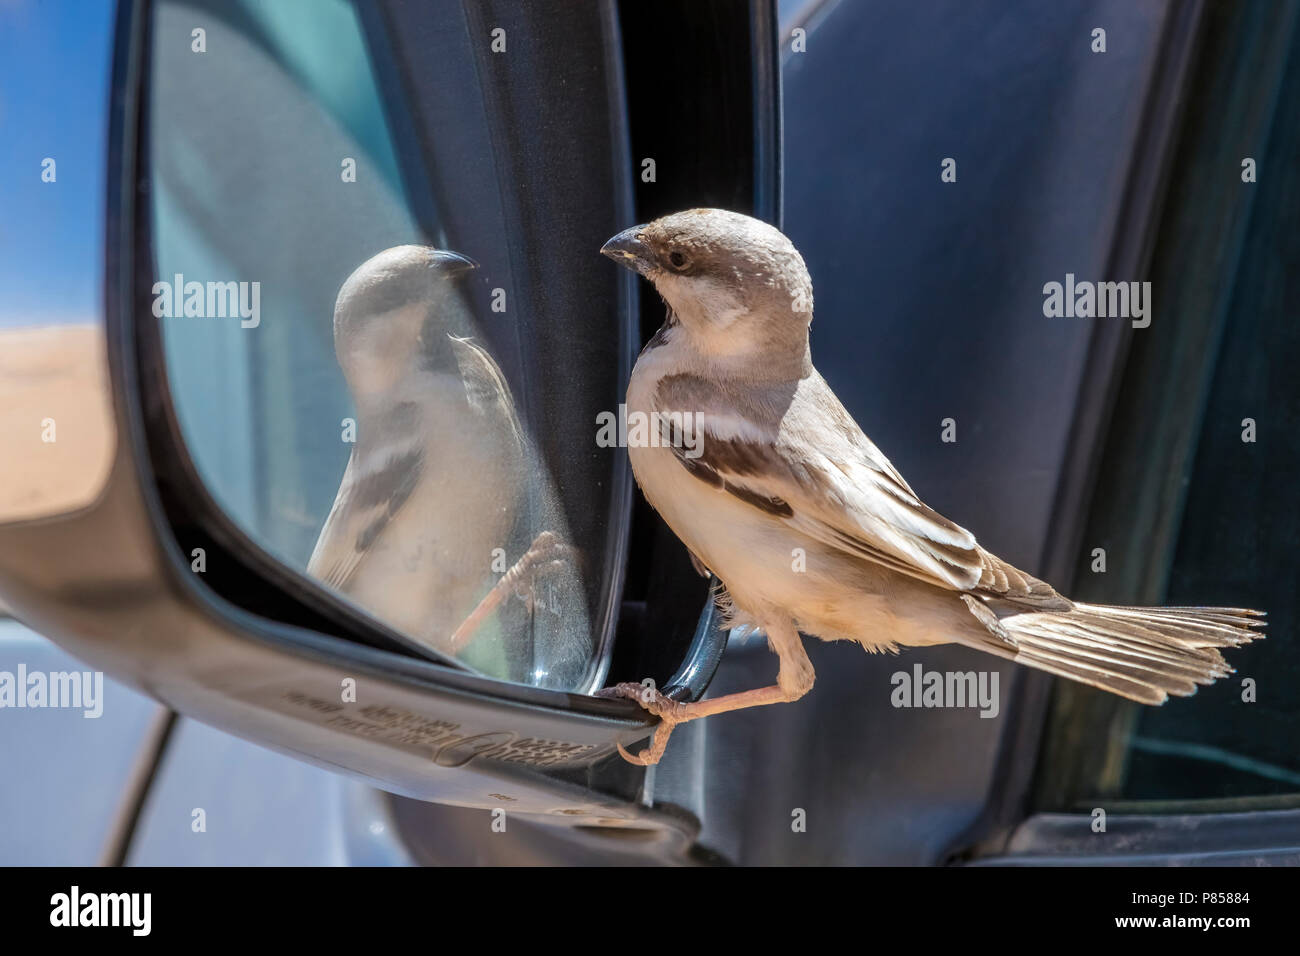 Male Northern Desert Sparrow fighting with his competitor on the other side of the mirror, Inchiri, Mauritania. April 04, 2018. Stock Photo